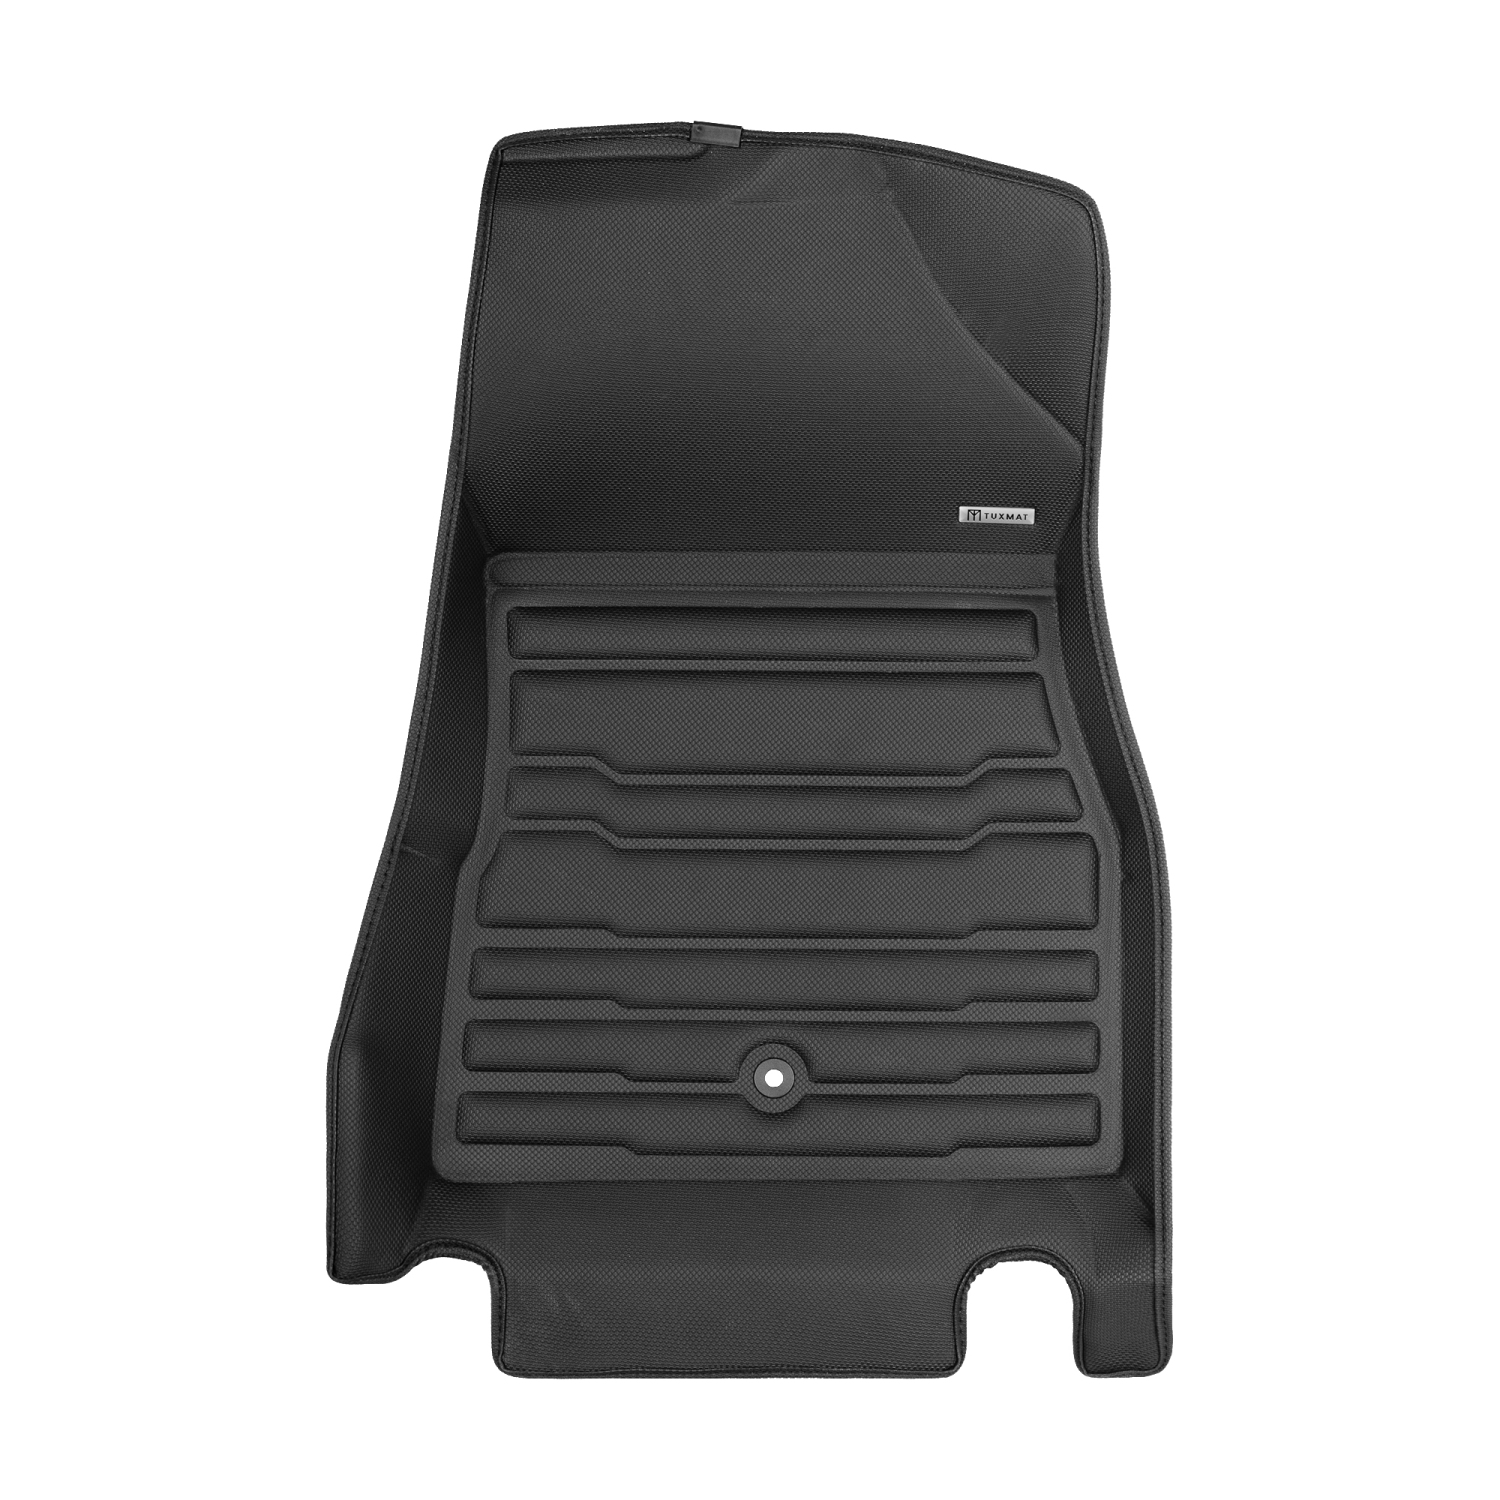 The Ultimate Winter Mats Largest Coverage Full Set - Black All Weather Also Look Great in the Summer. The Best Nissan Juke Accessory. TuxMat Custom Car Floor Mats for Nissan Juke 2011-2018 Models - Laser Measured Waterproof